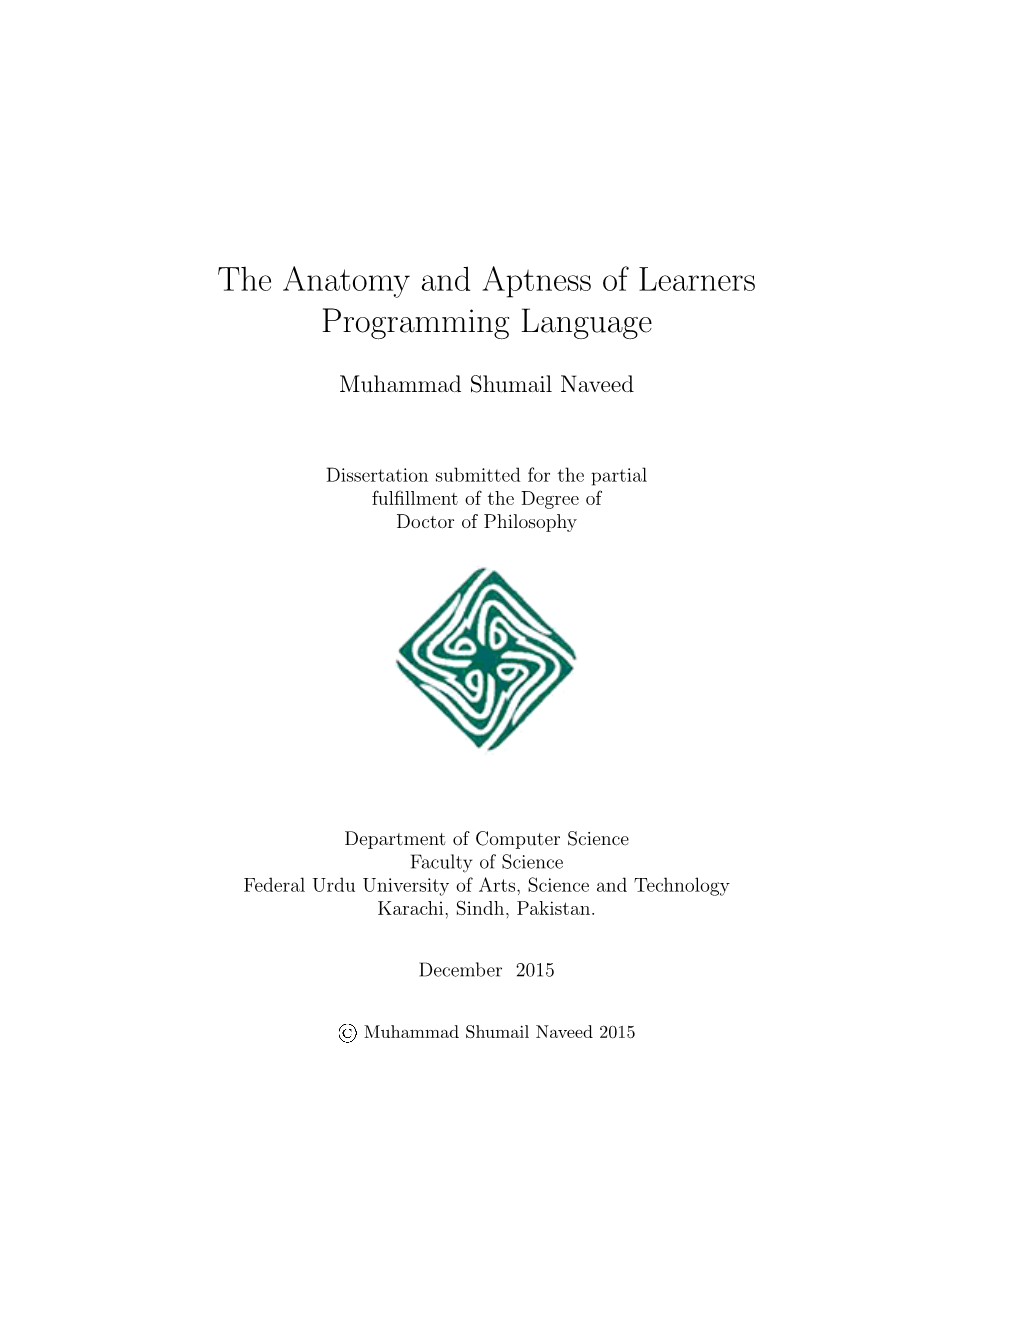 The Anatomy and Aptness of Learners Programming Language